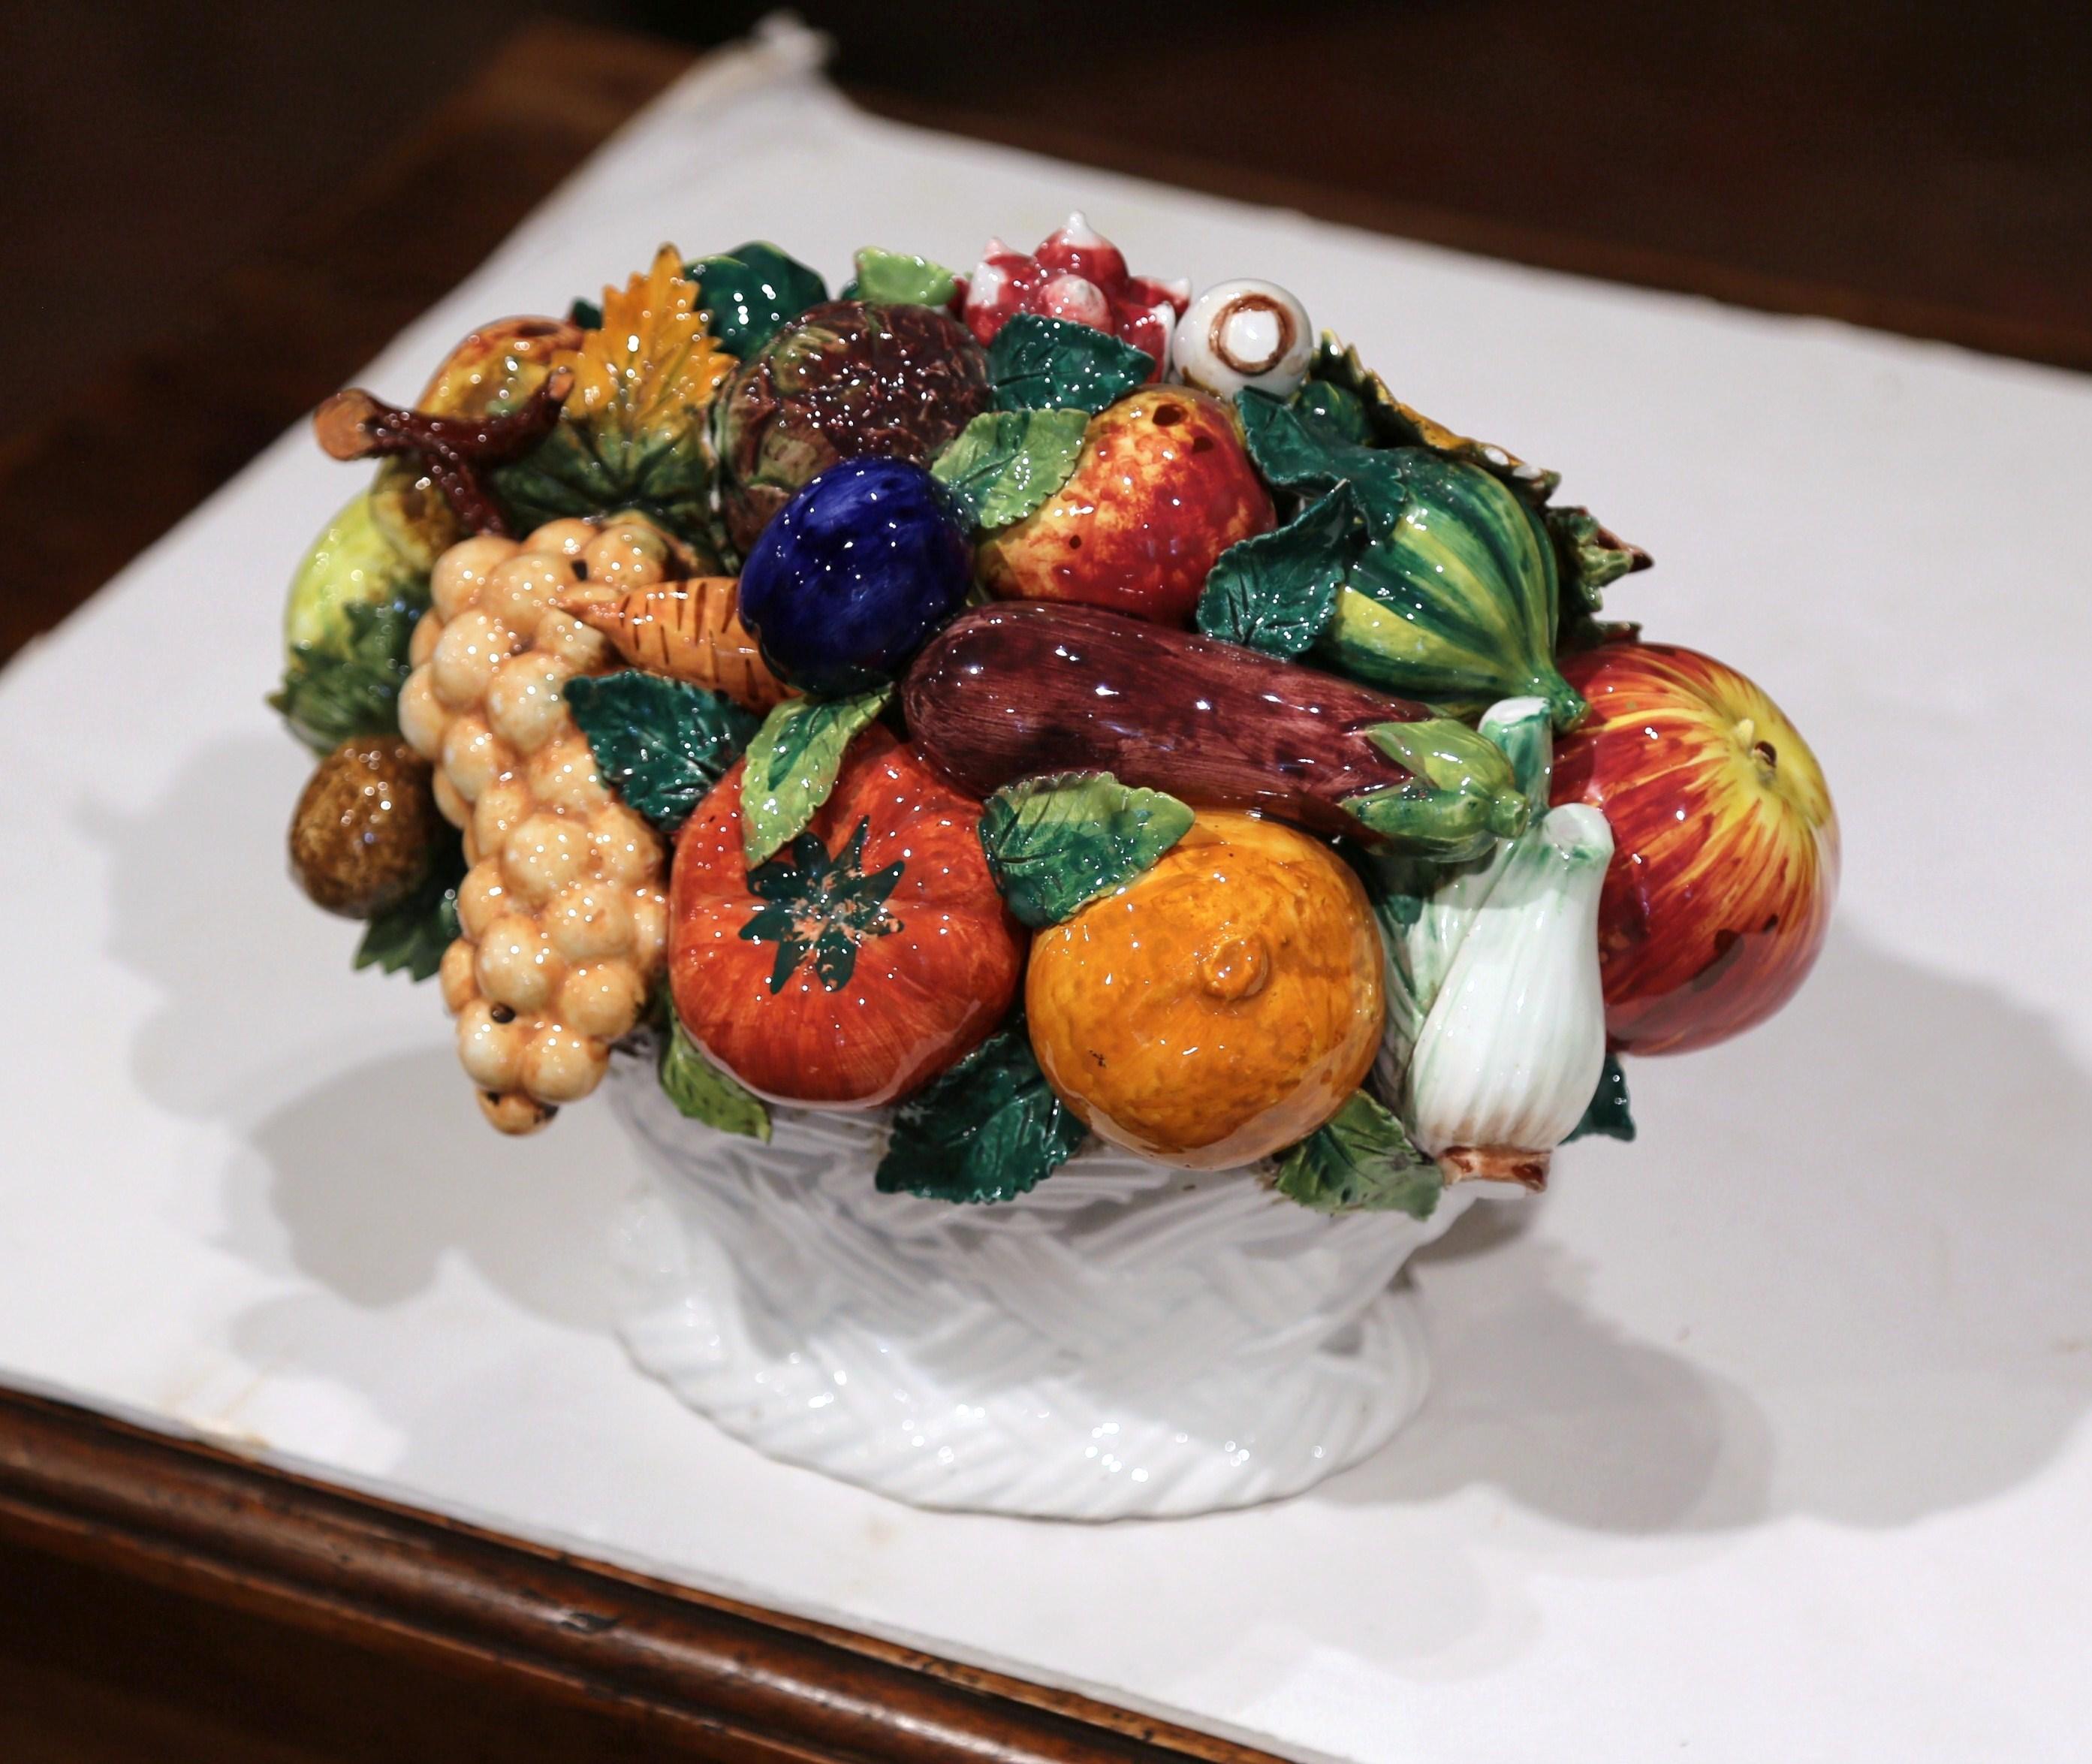 Decorate a tabletop with this colorful, majolica basket composition. Crafted in France circa 1950, the centerpiece features a realistic assortment of fruits and vegetables in high relief inside a weave shape white basket. The still life arrangement